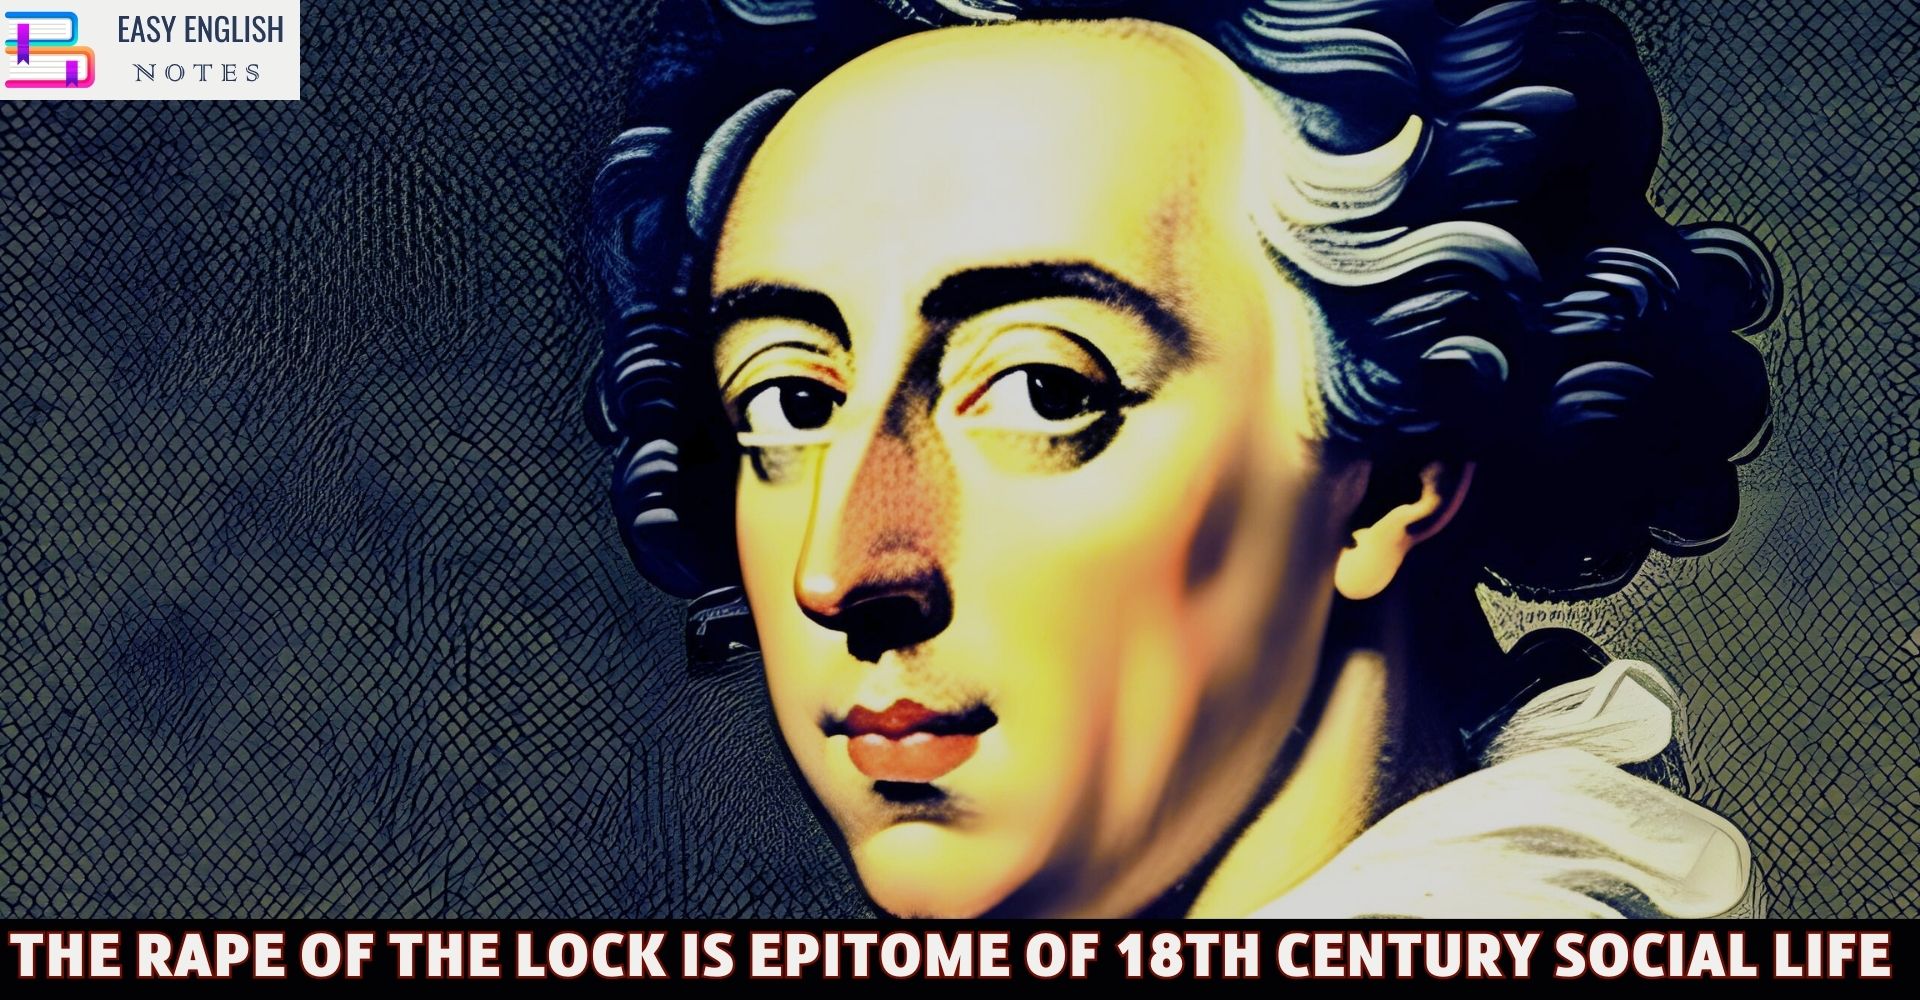 The Rape of the Lock is Epitome of 18th century Social Life